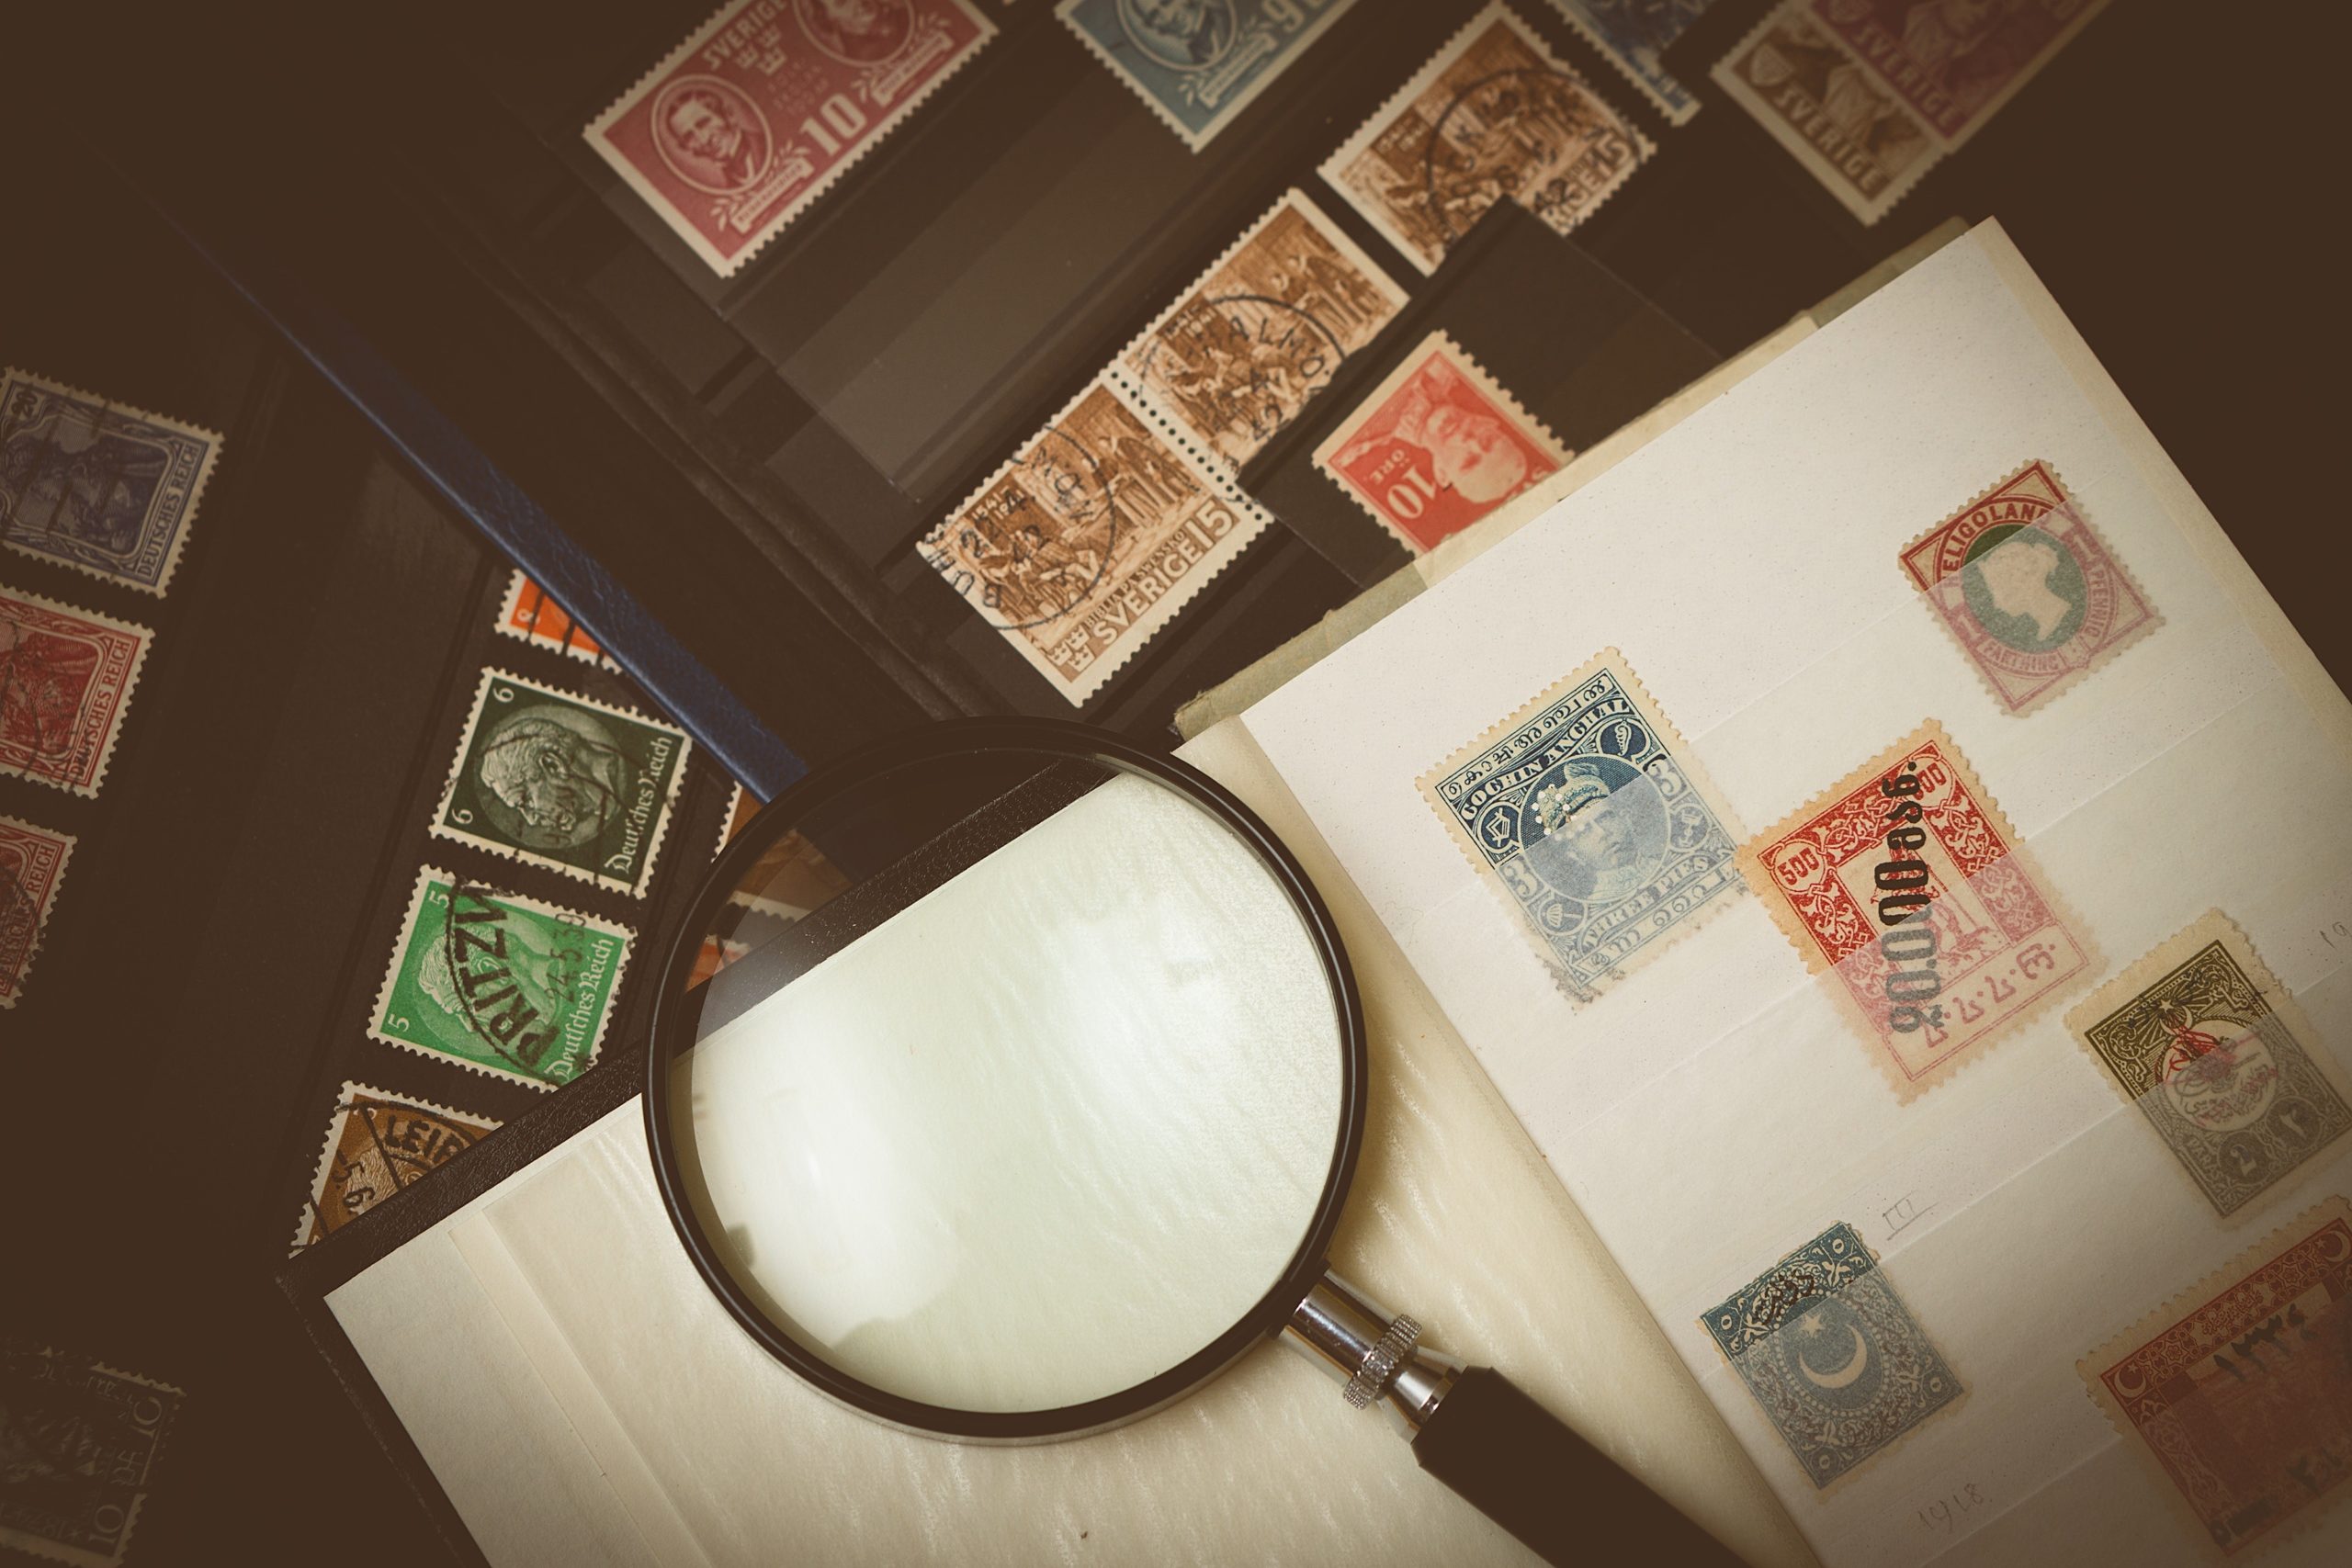 How To Recycle Stamps